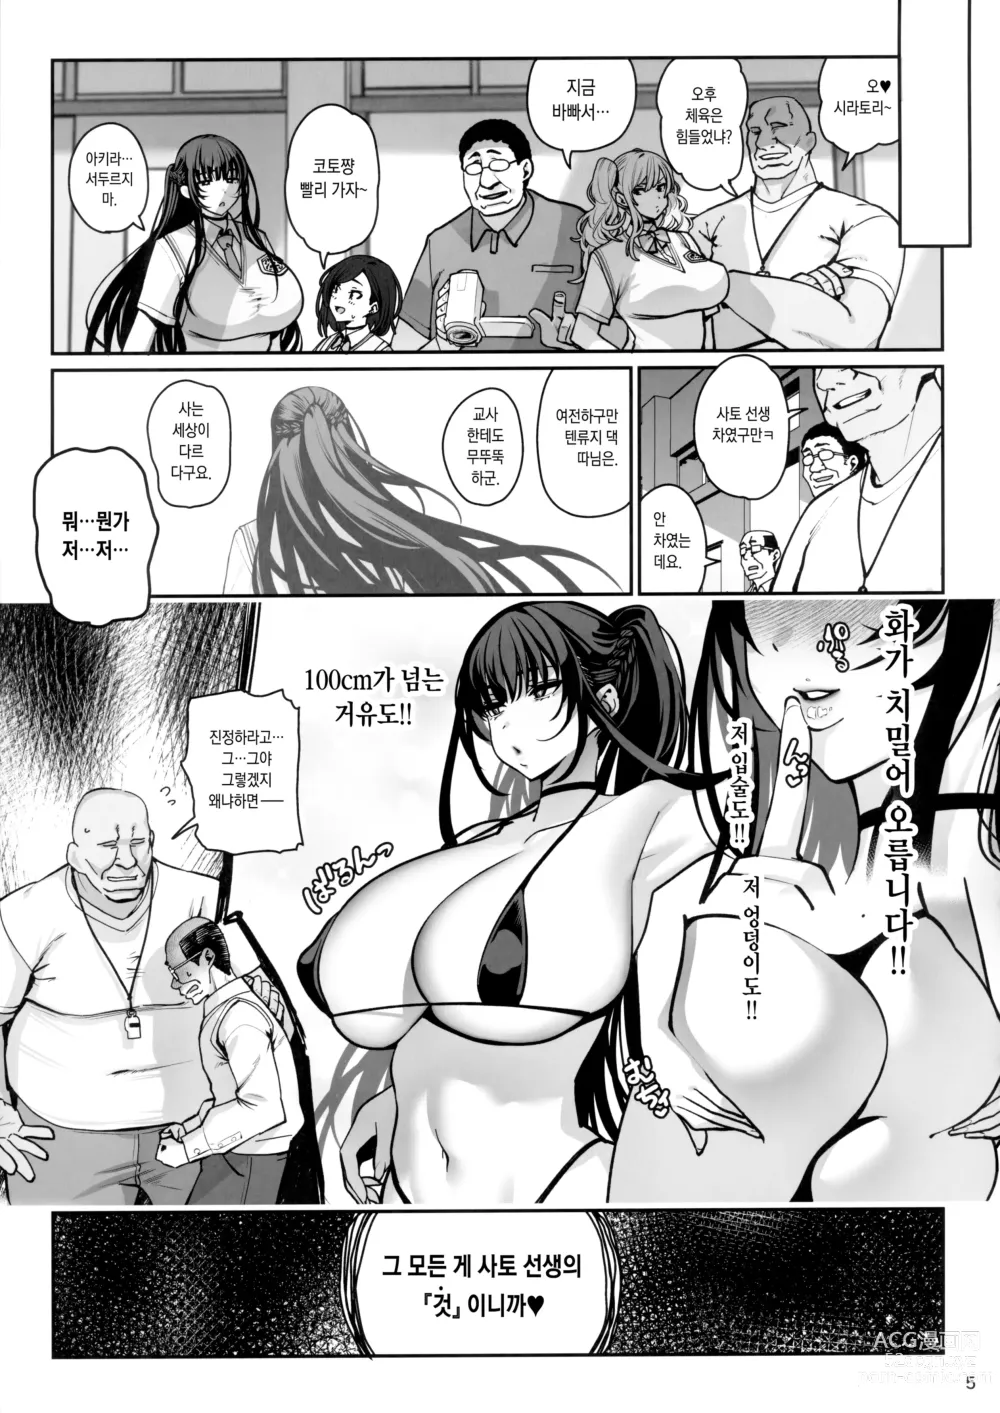 Page 6 of doujinshi 여친 최면 3